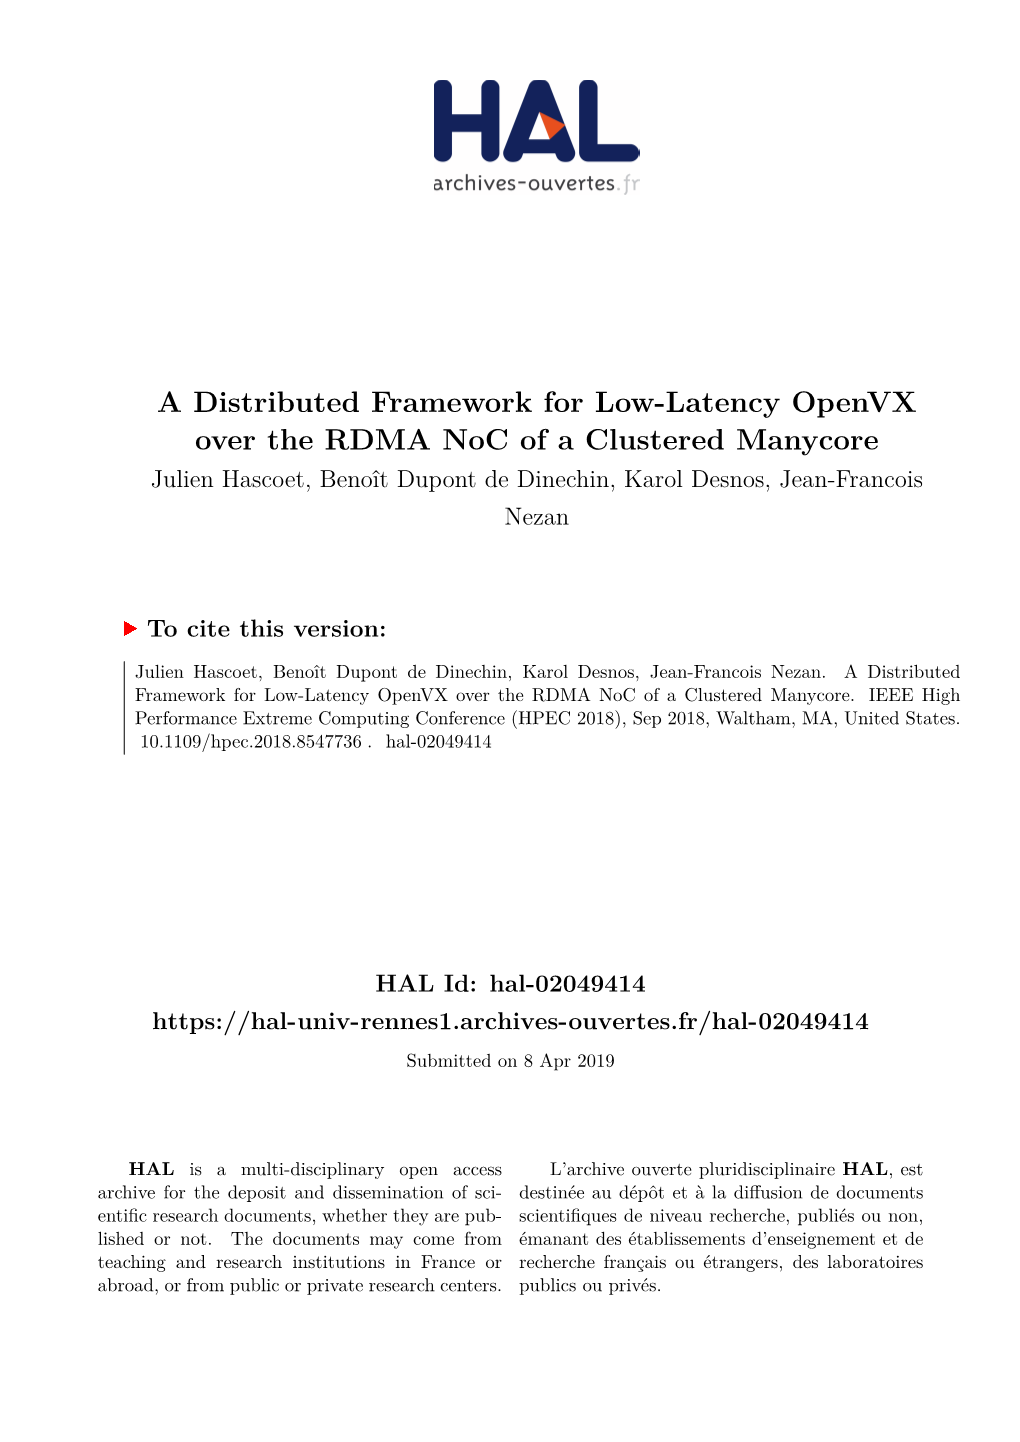 A Distributed Framework for Low-Latency Openvx Over the RDMA Noc of a Clustered Manycore Julien Hascoet, Benoît Dupont De Dinechin, Karol Desnos, Jean-Francois Nezan